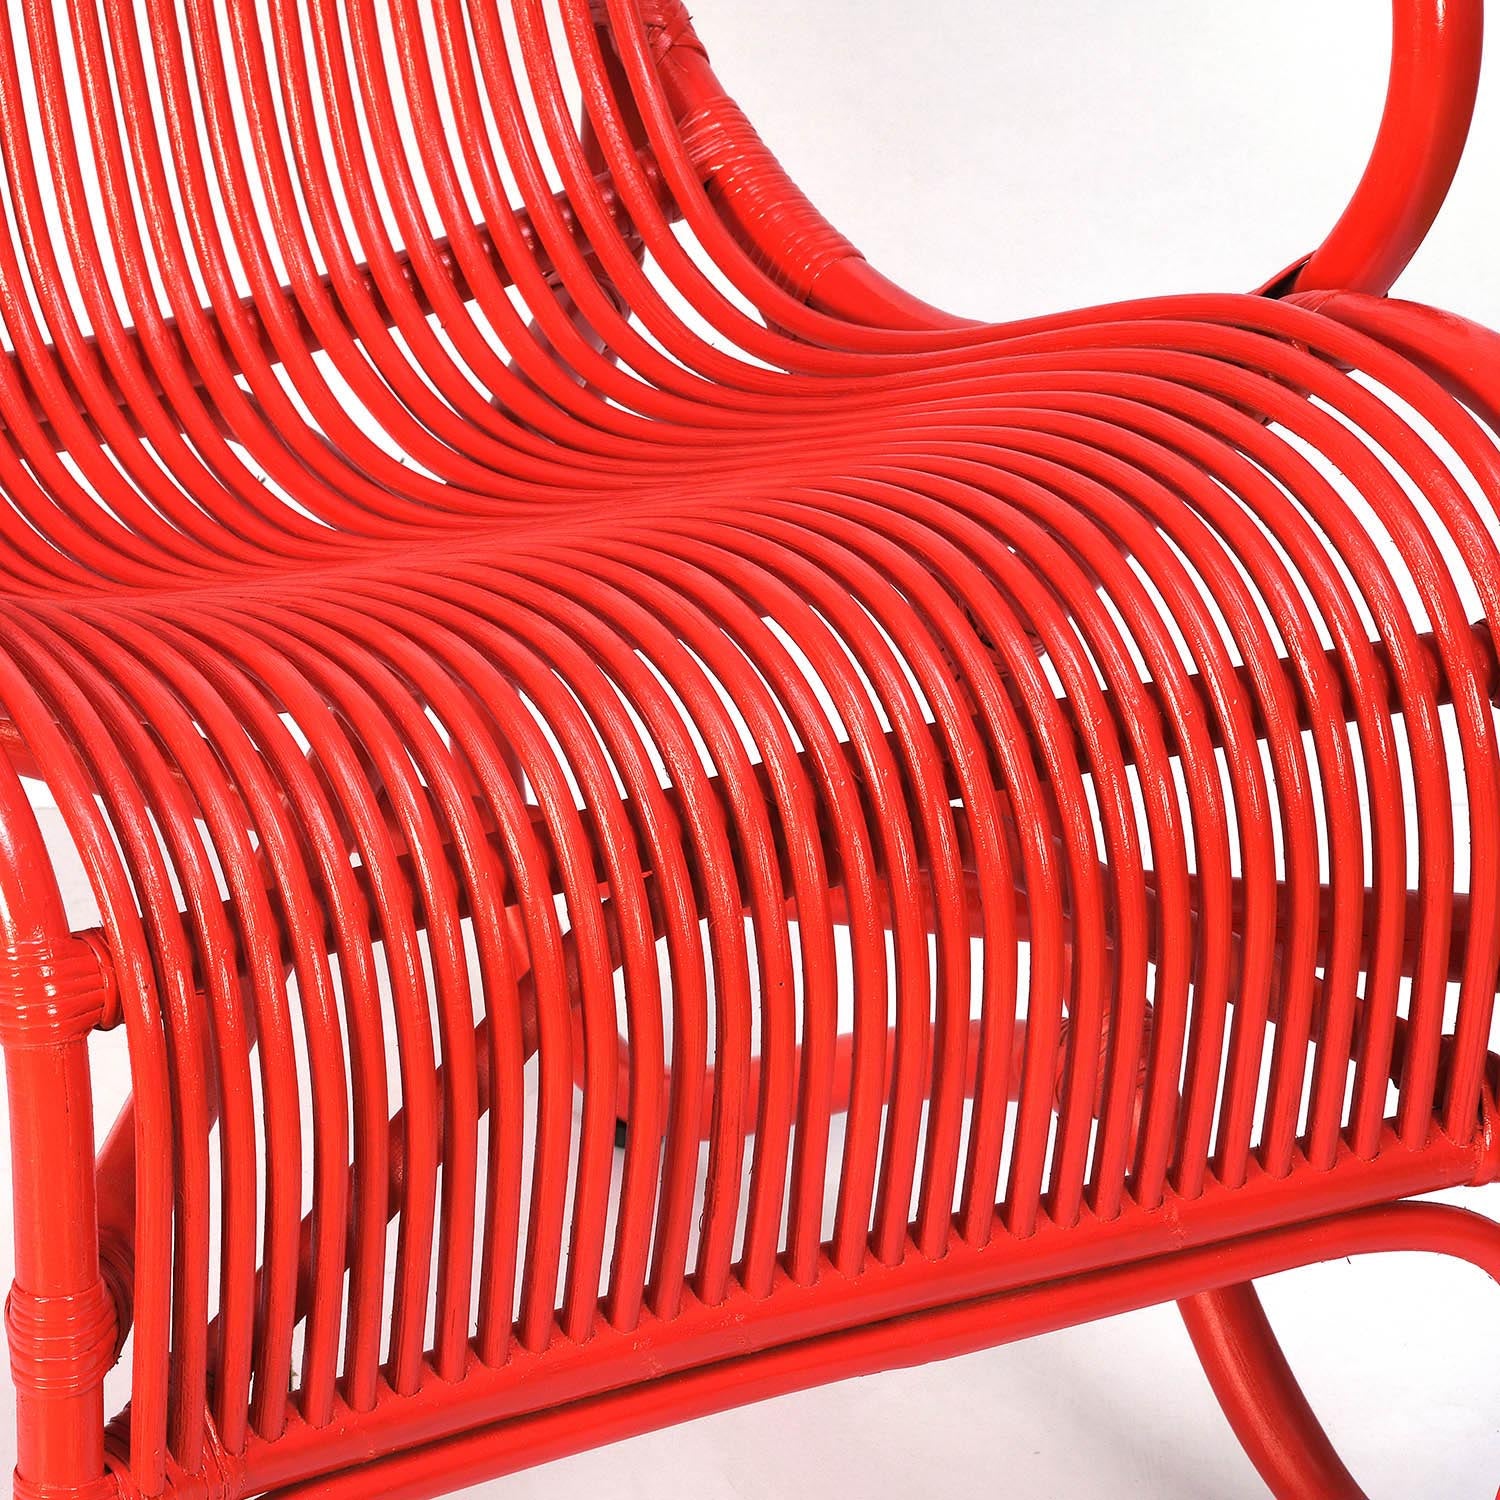 Yale Arm Chair (Red)